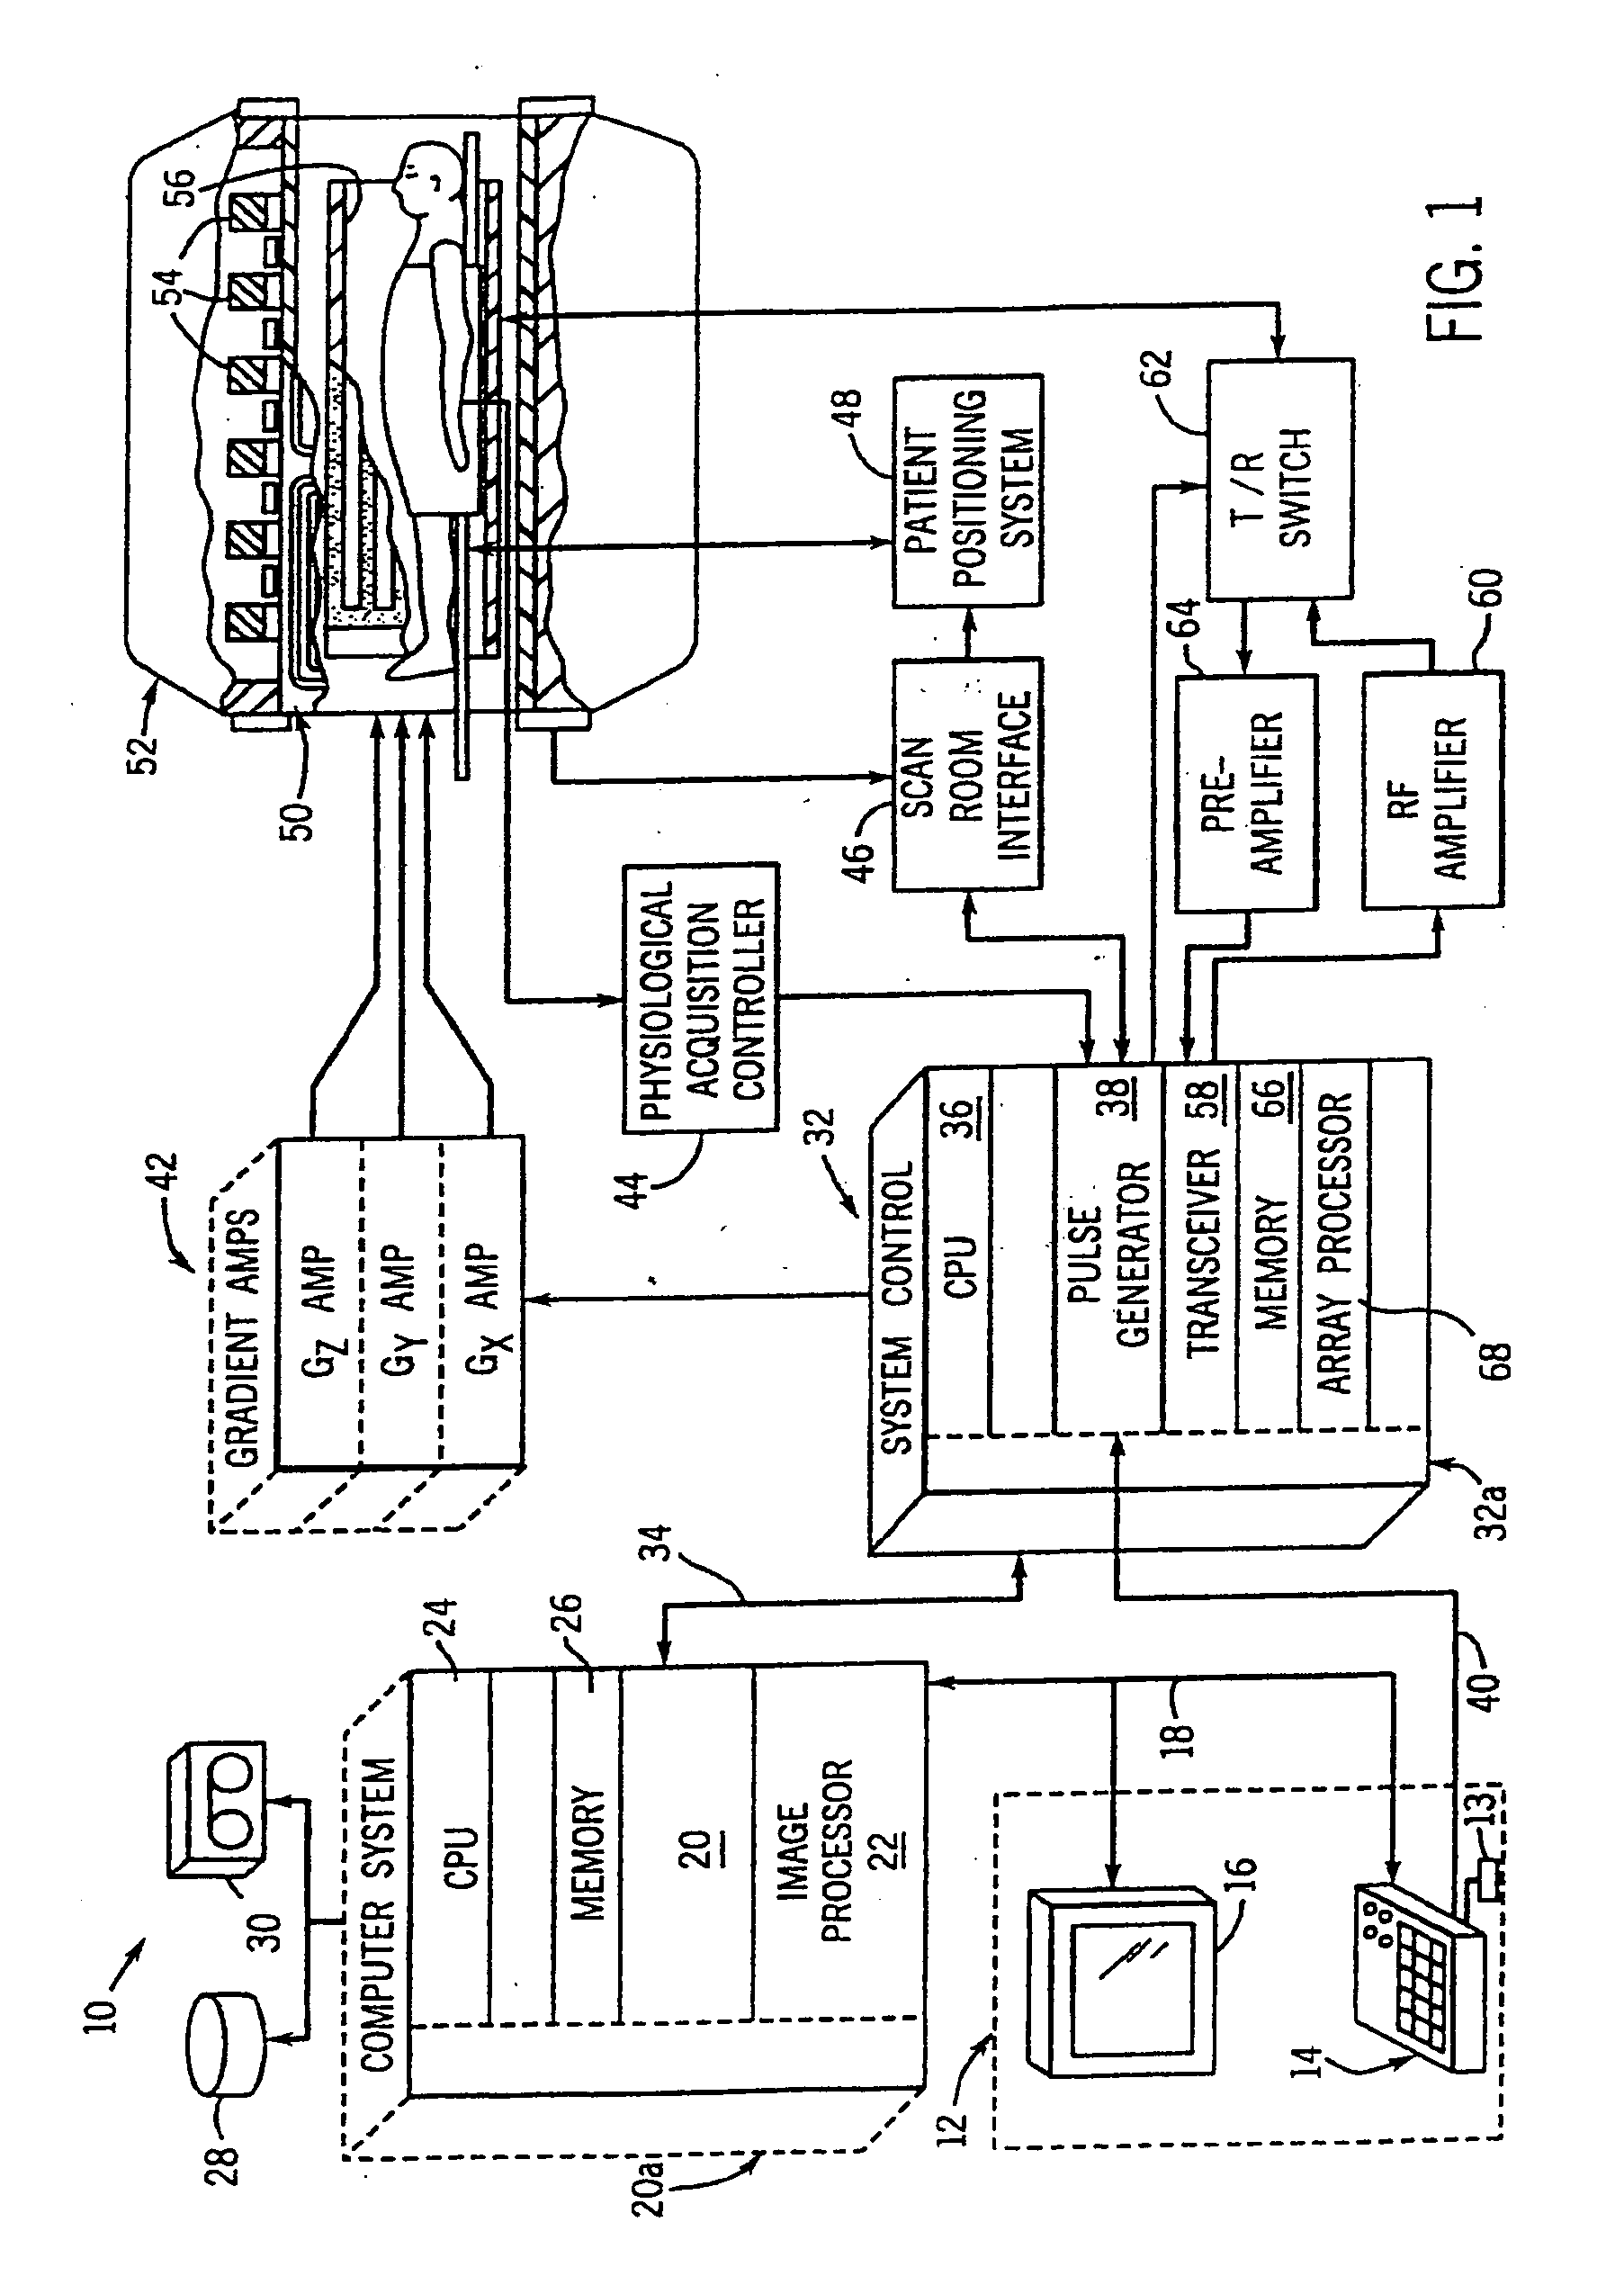 Method and apparatus to generate an RF excitation consistent with a desired excitation profile using a transmit coil array